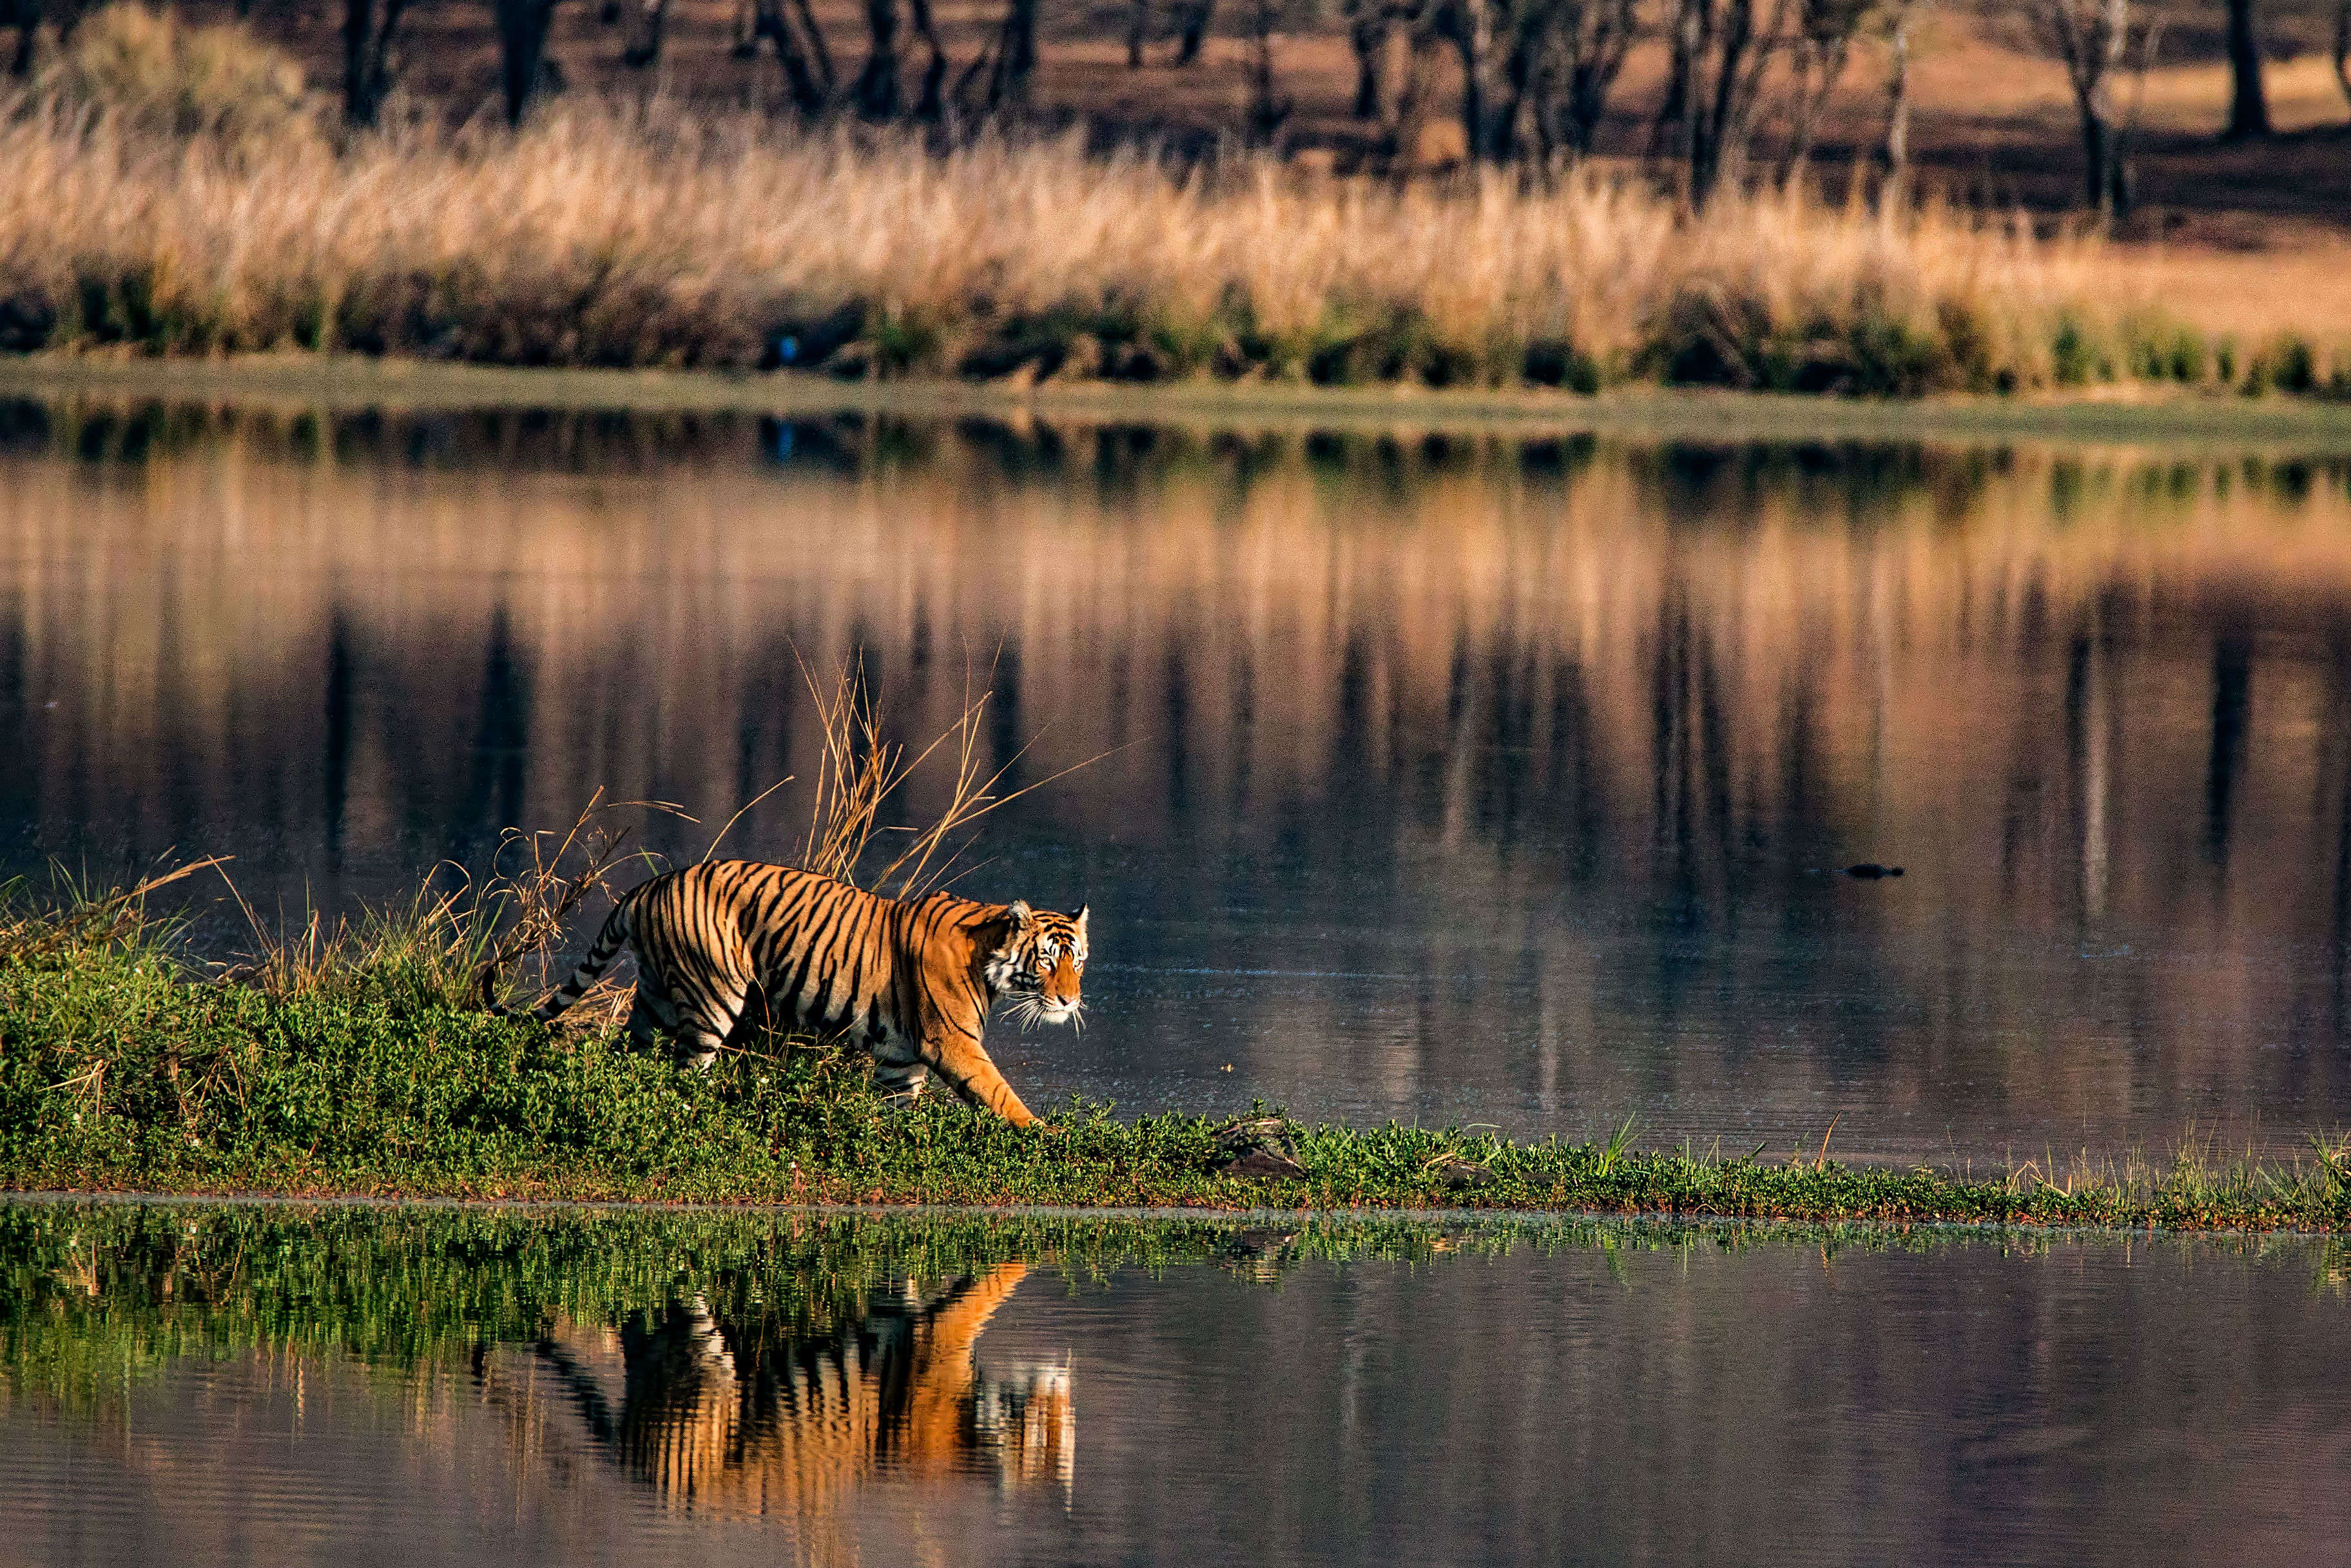 The ferocious swamp tigers of Sundarbans could get extinct in the next 50 years